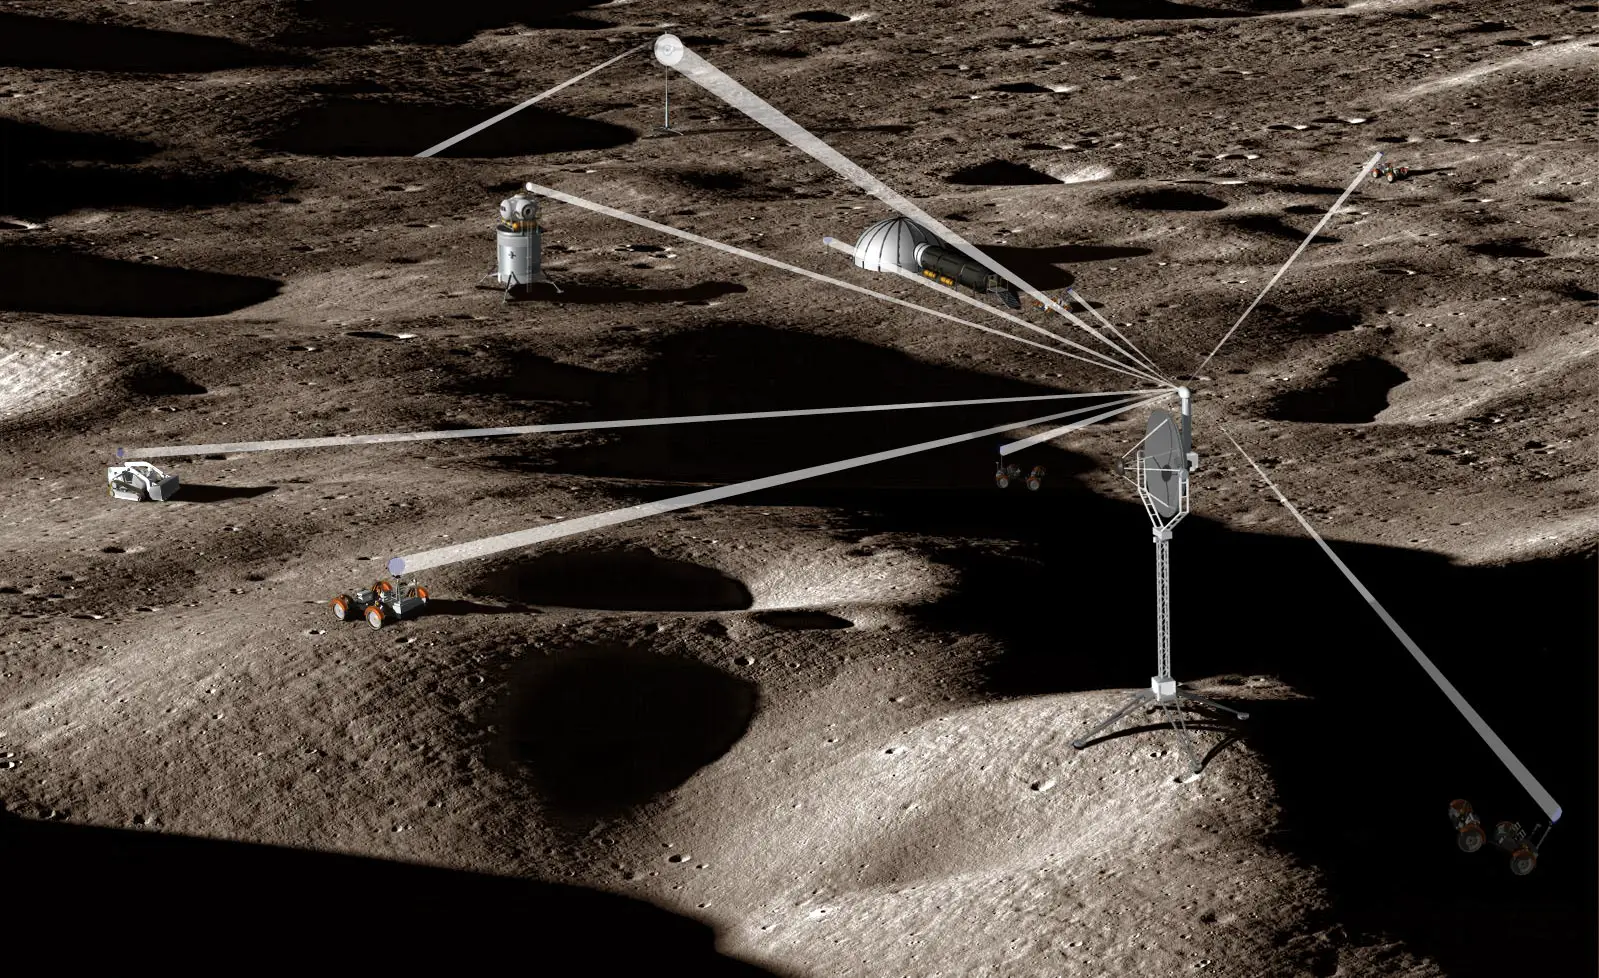 NASA Selects 12 Companies to Innovate on Key Moon and Mars Technology